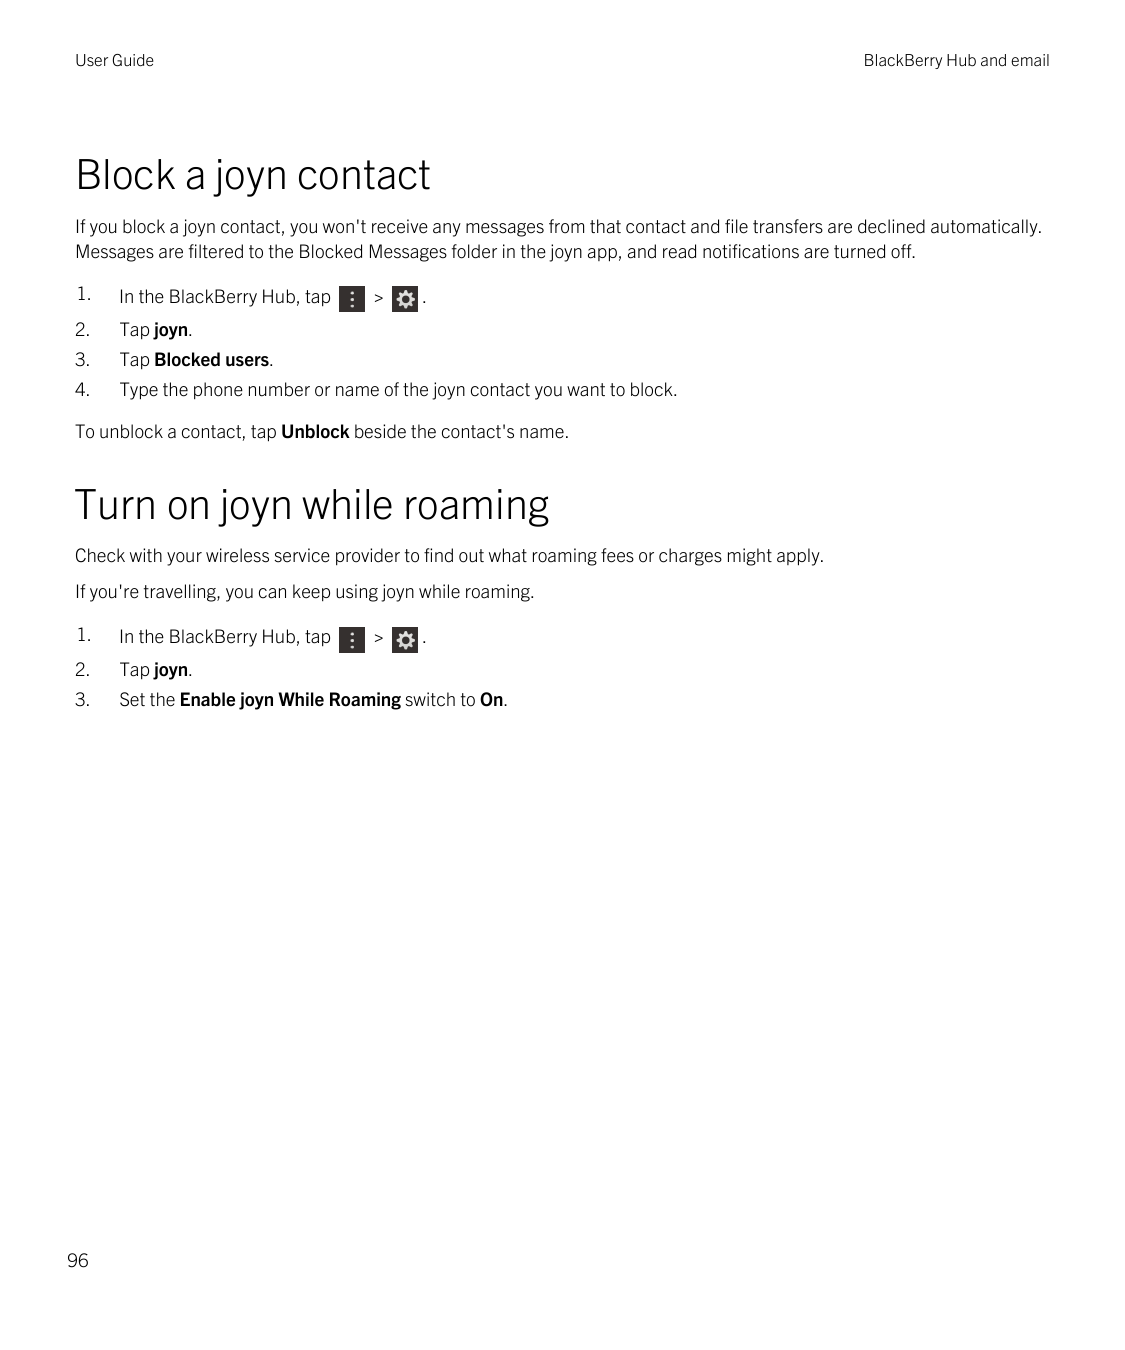 User GuideBlackBerry Hub and emailBlock a joyn contactIf you block a joyn contact, you won't receive any messages from that cont